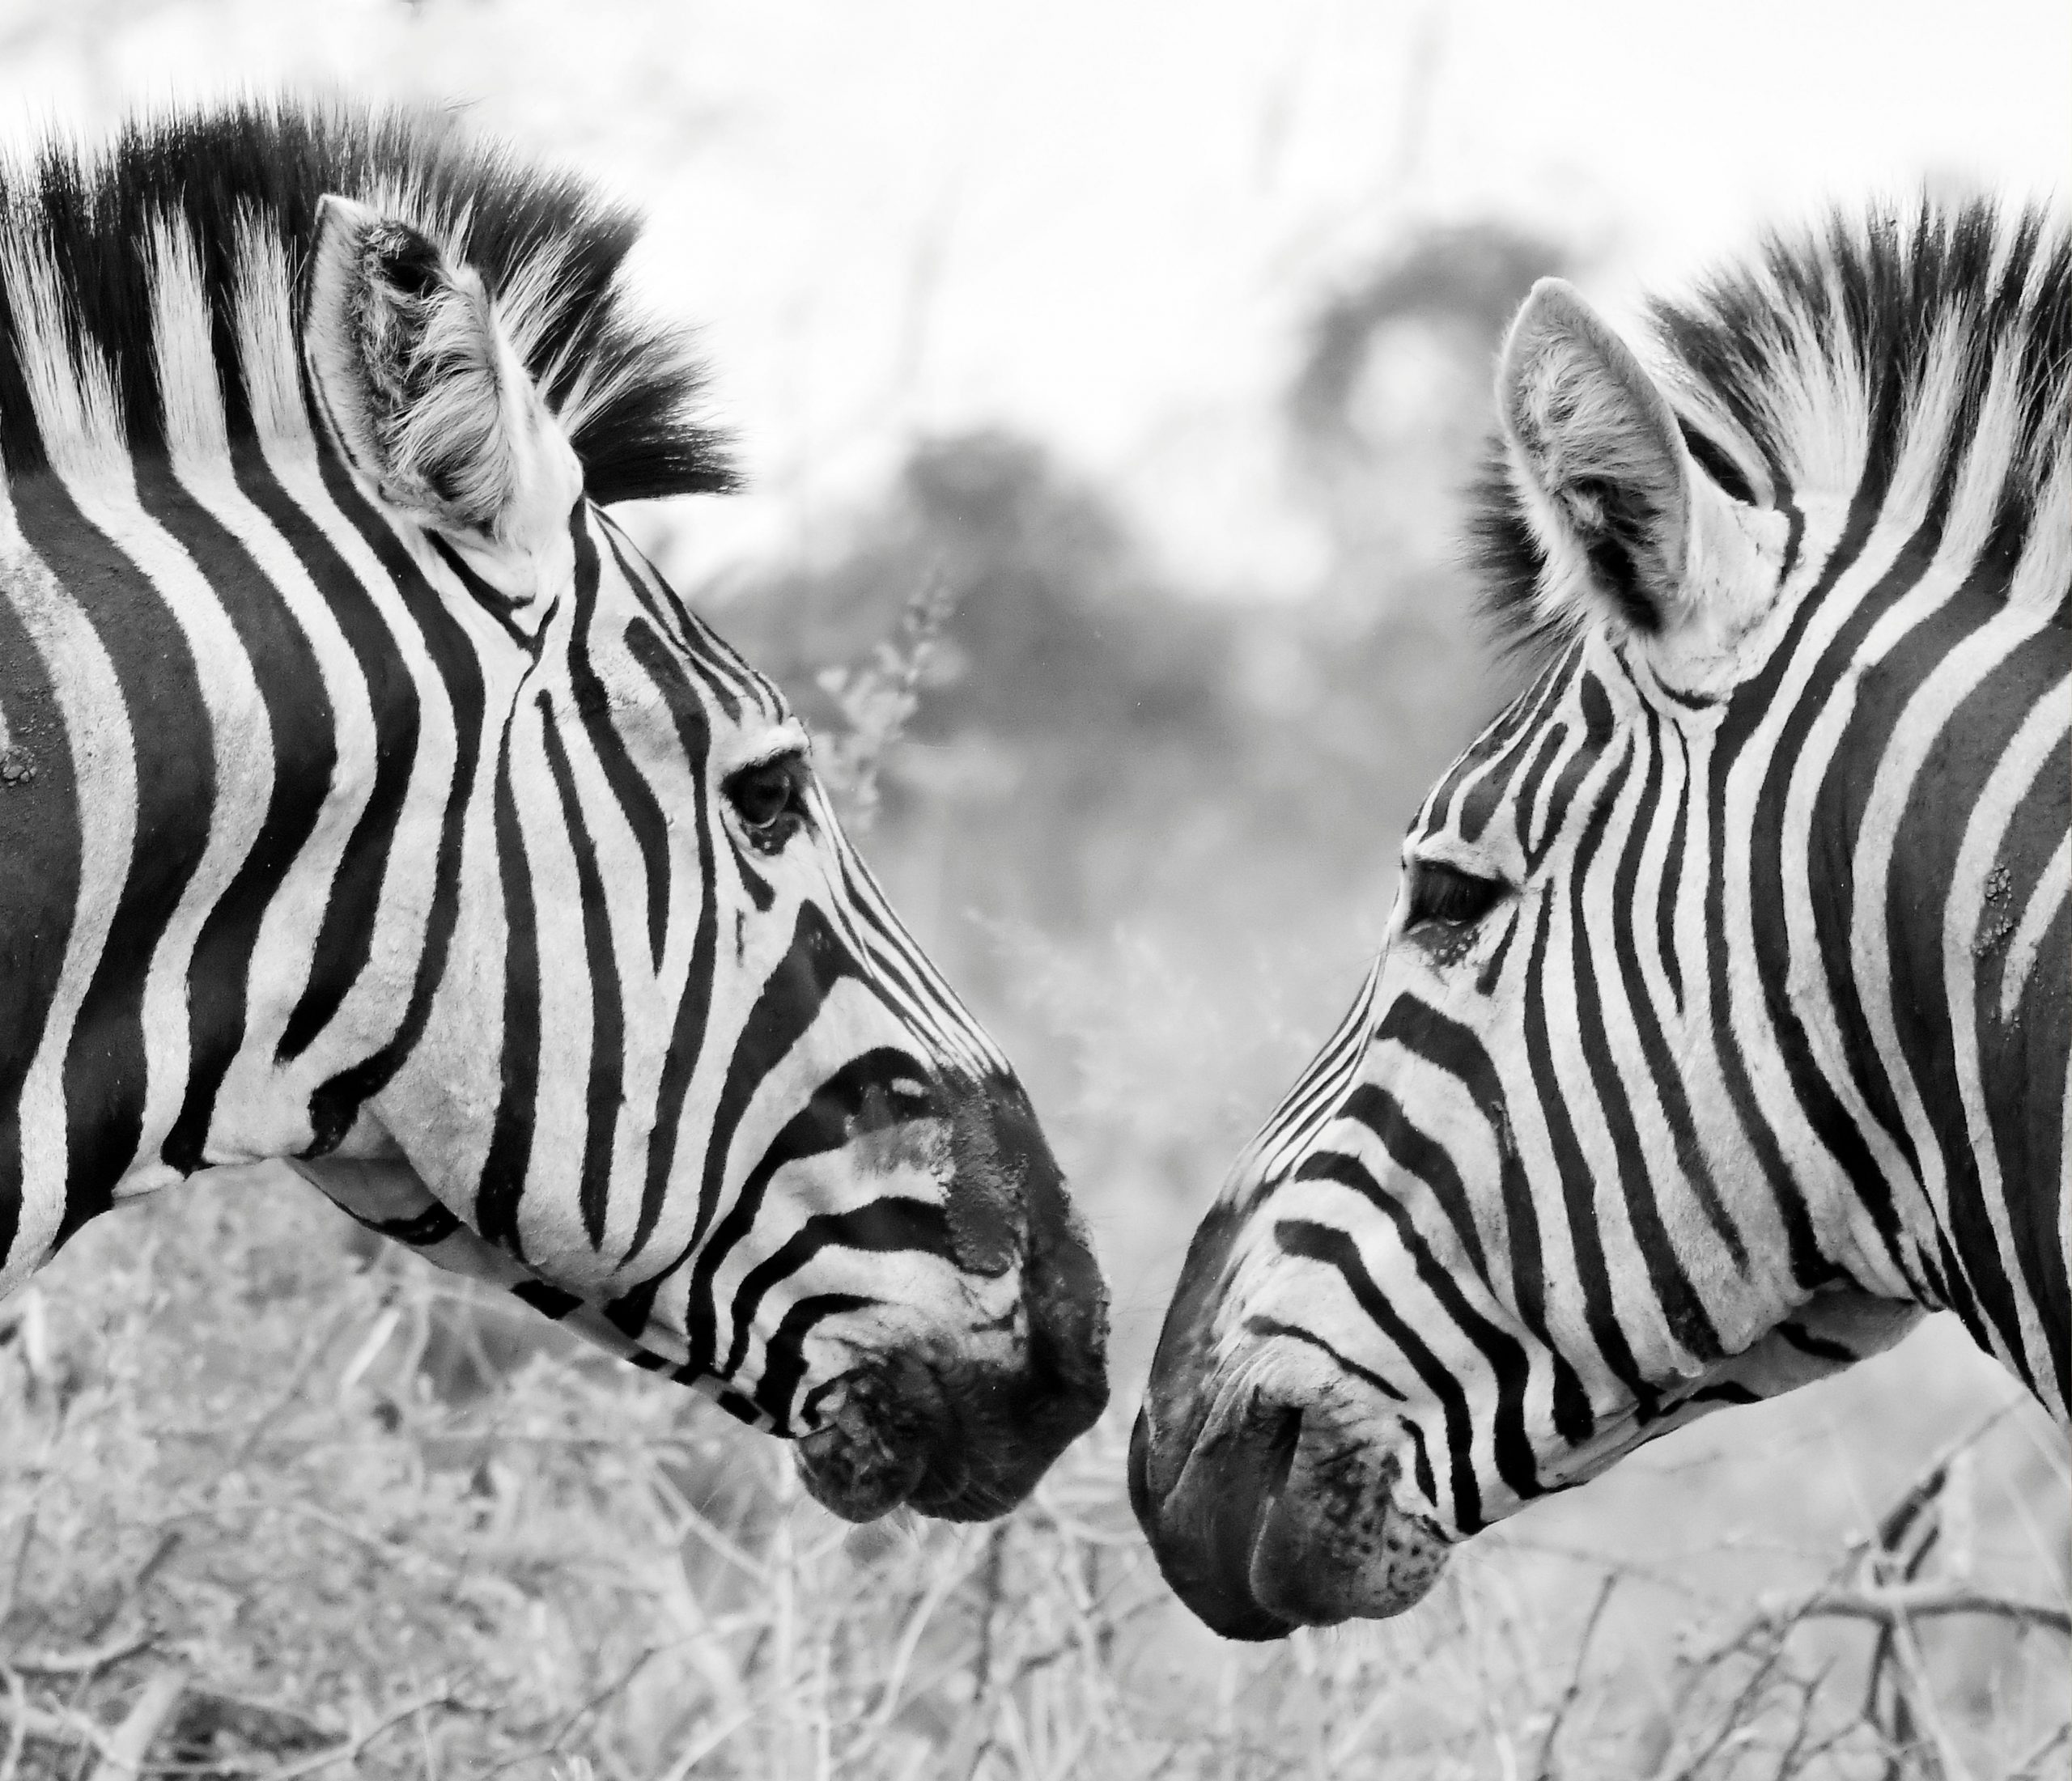 Zebra companies matter for both economy and society